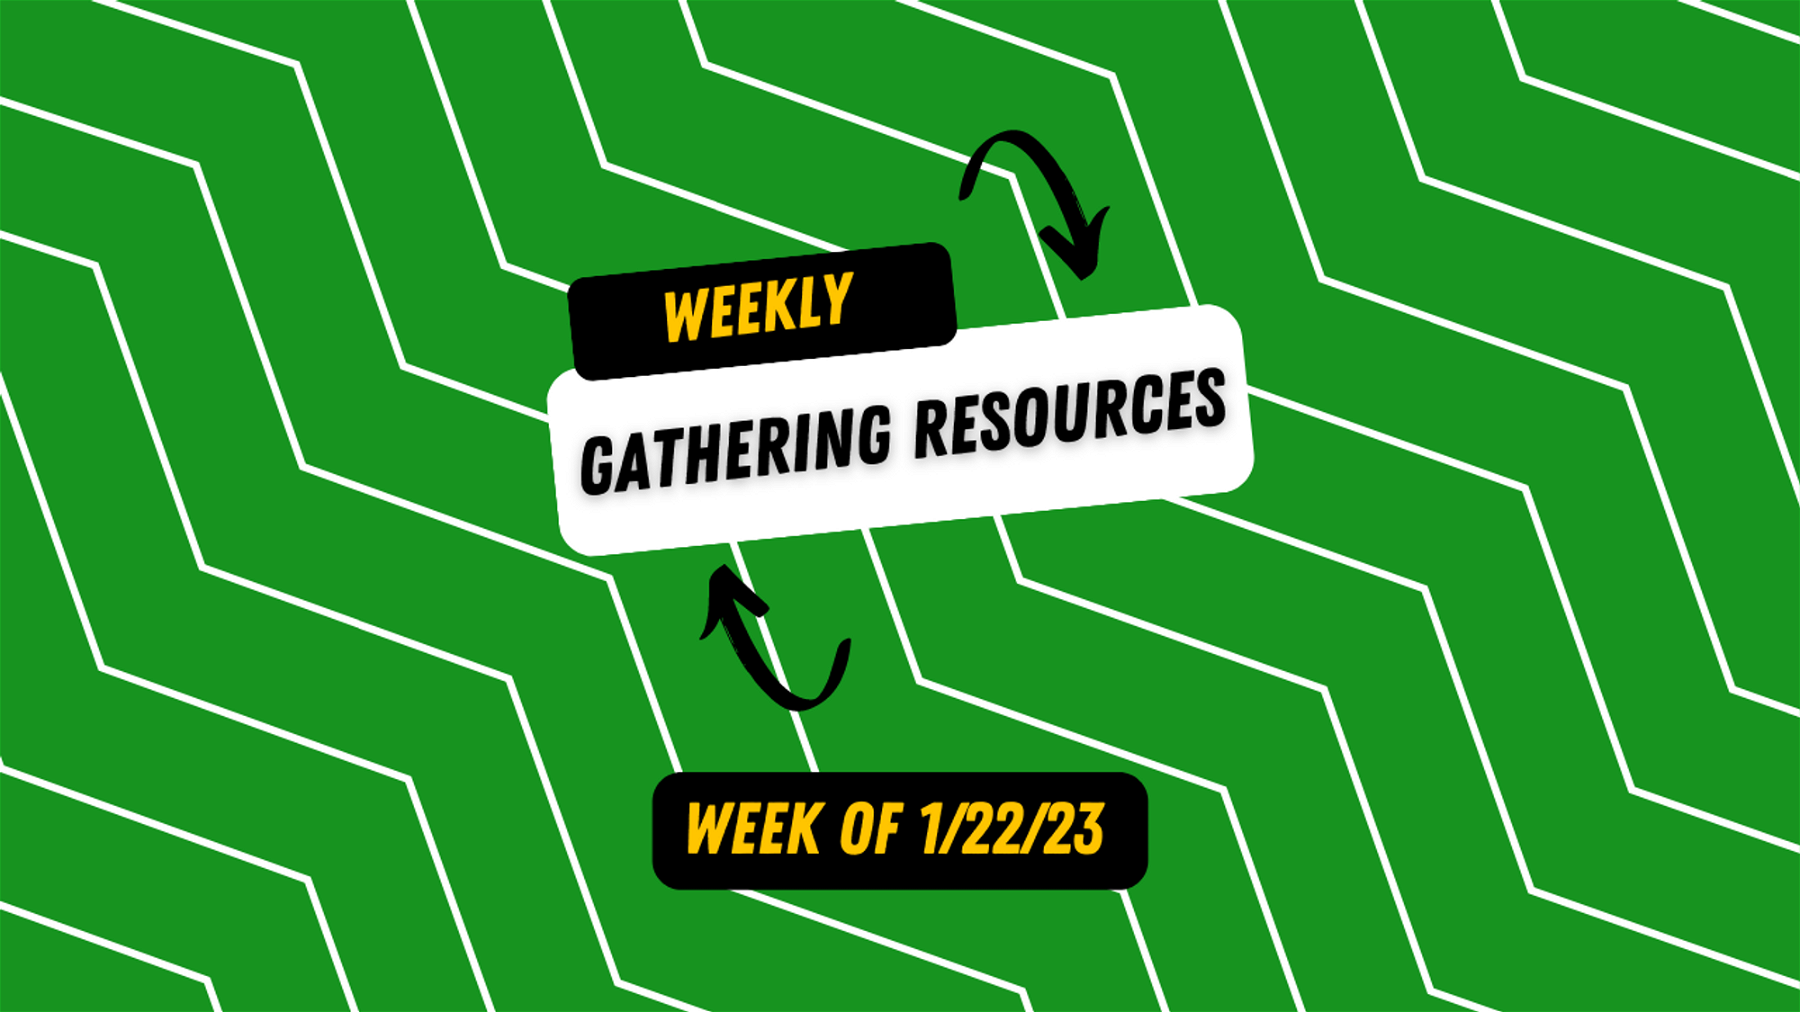 Weekly Gathering Resources for 1/22/23